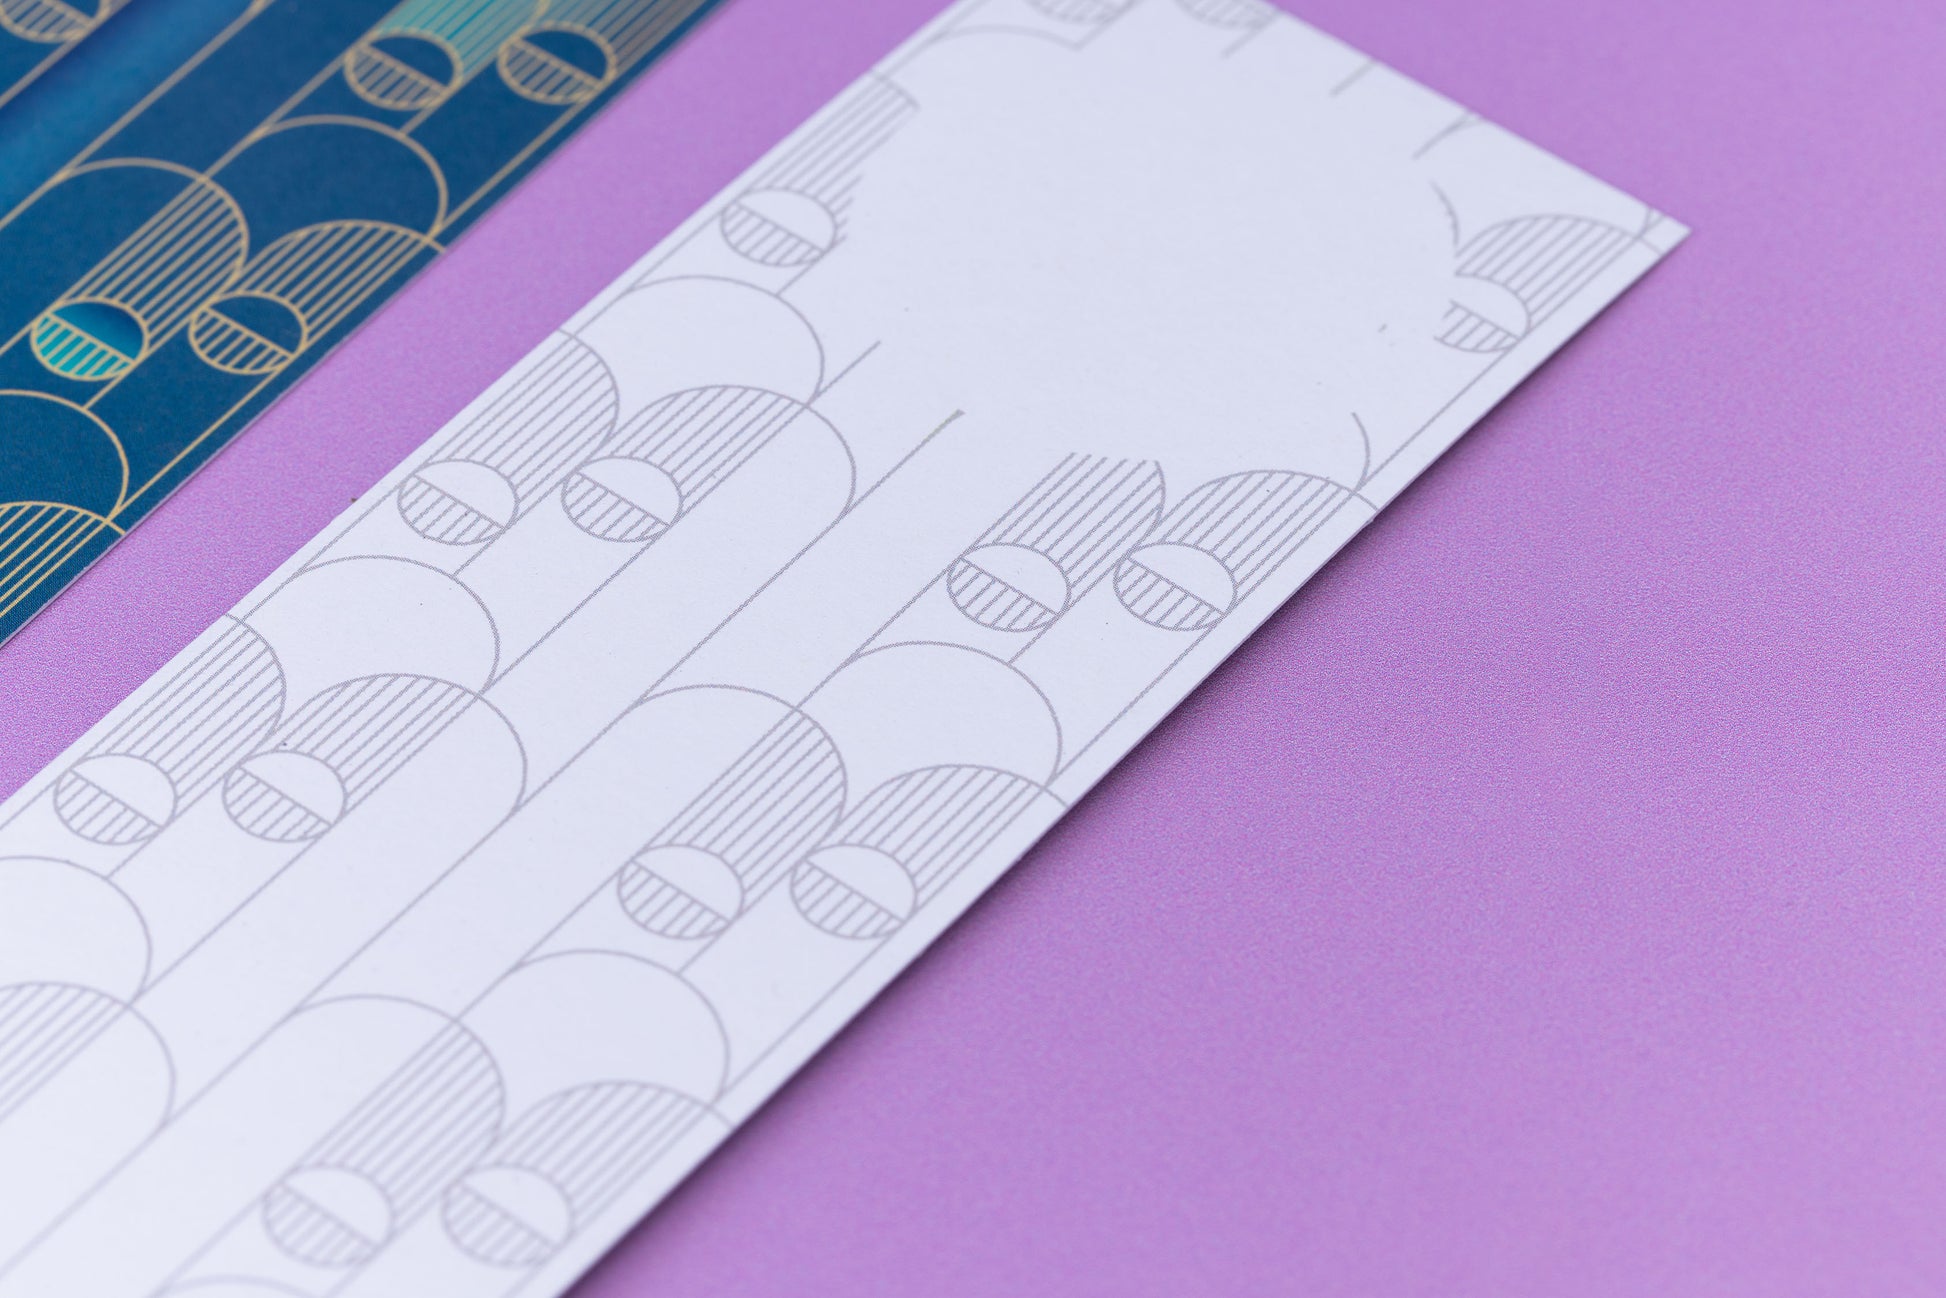 Image of 2 Deco Delights Double sided bookmarks.  The focus is on the top of the monochrome reverse side, showing the blank circle for writing in. Next to it is a full-colour side up, out of focus to the left. They are lying on a lilac desk. 